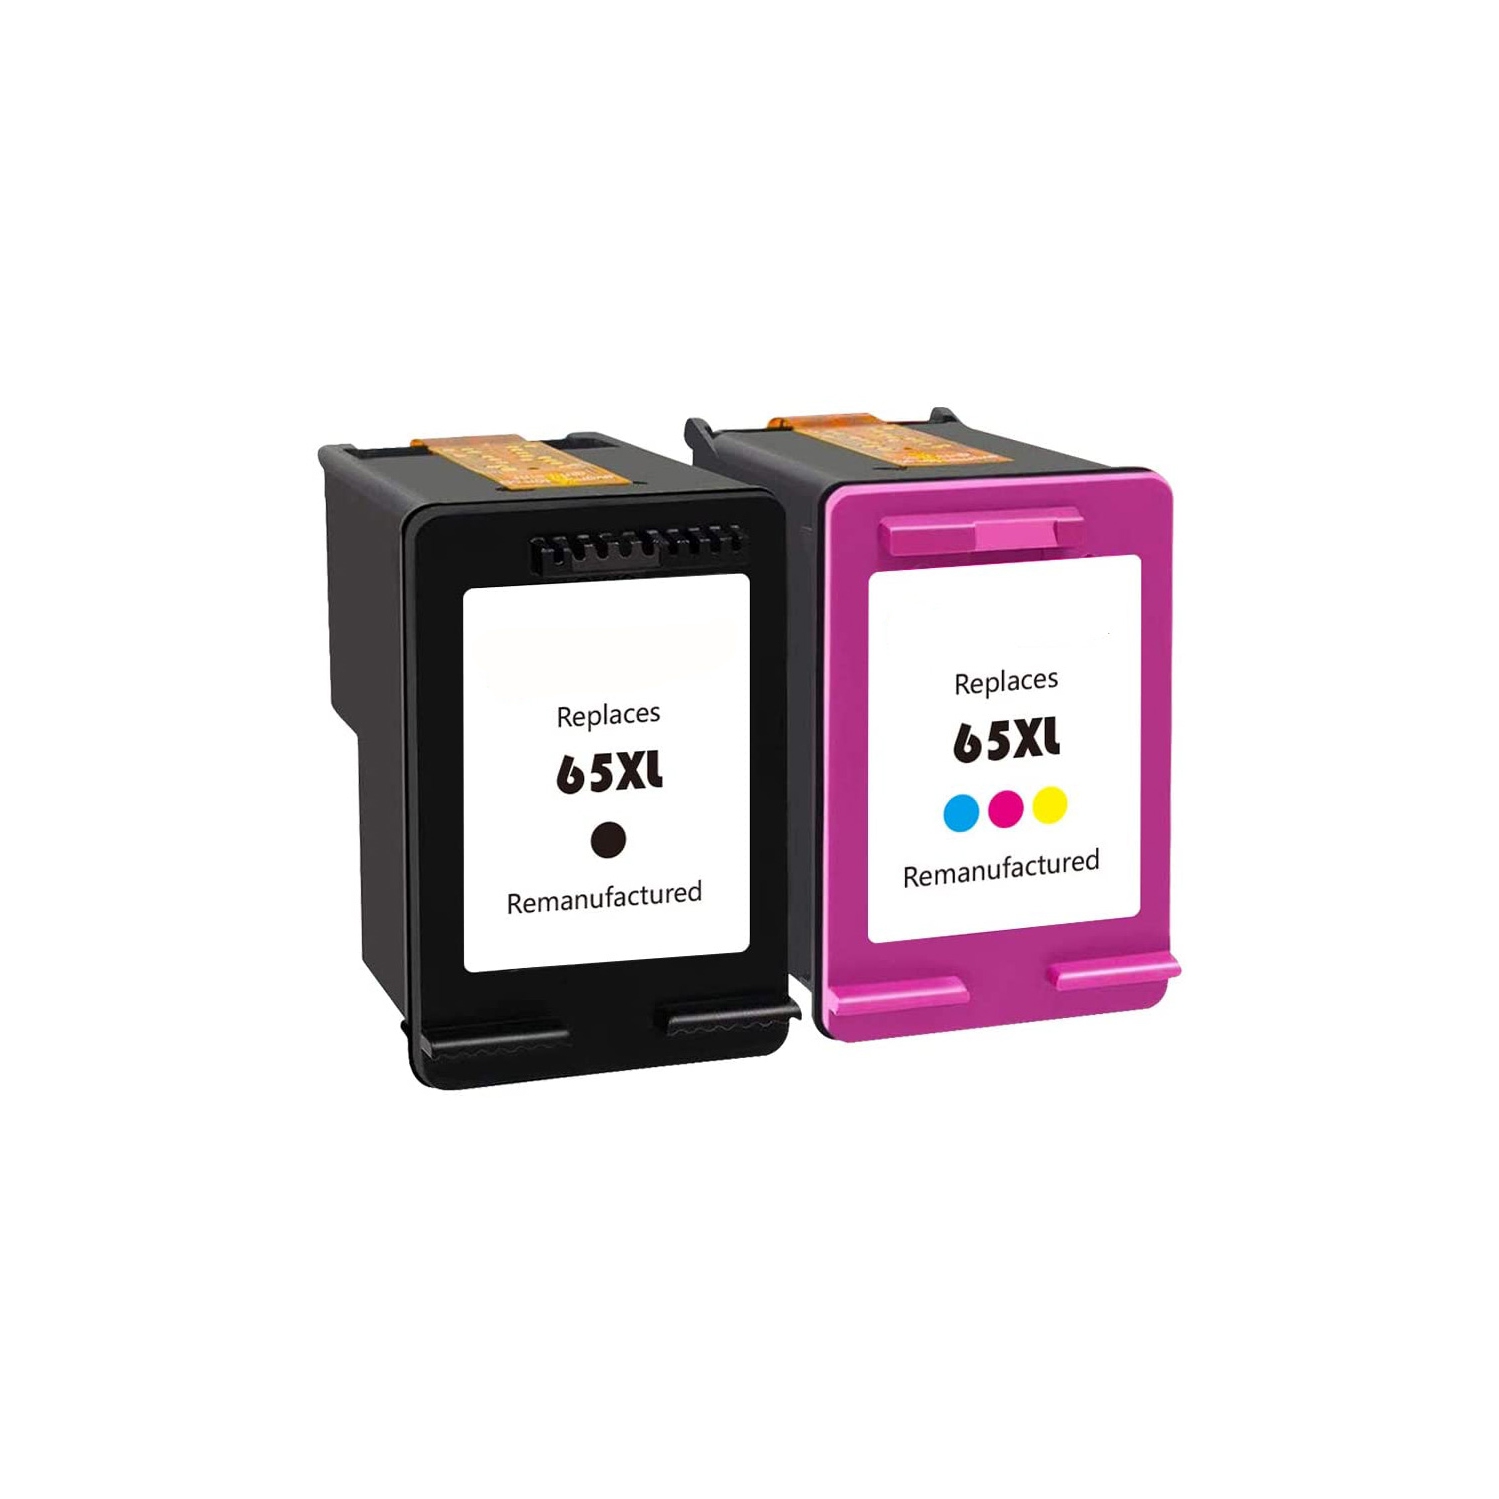 axGear Compatible HP 65XL Black and Color Ink Cartridge Combo DeskJet 2600 2622 2624